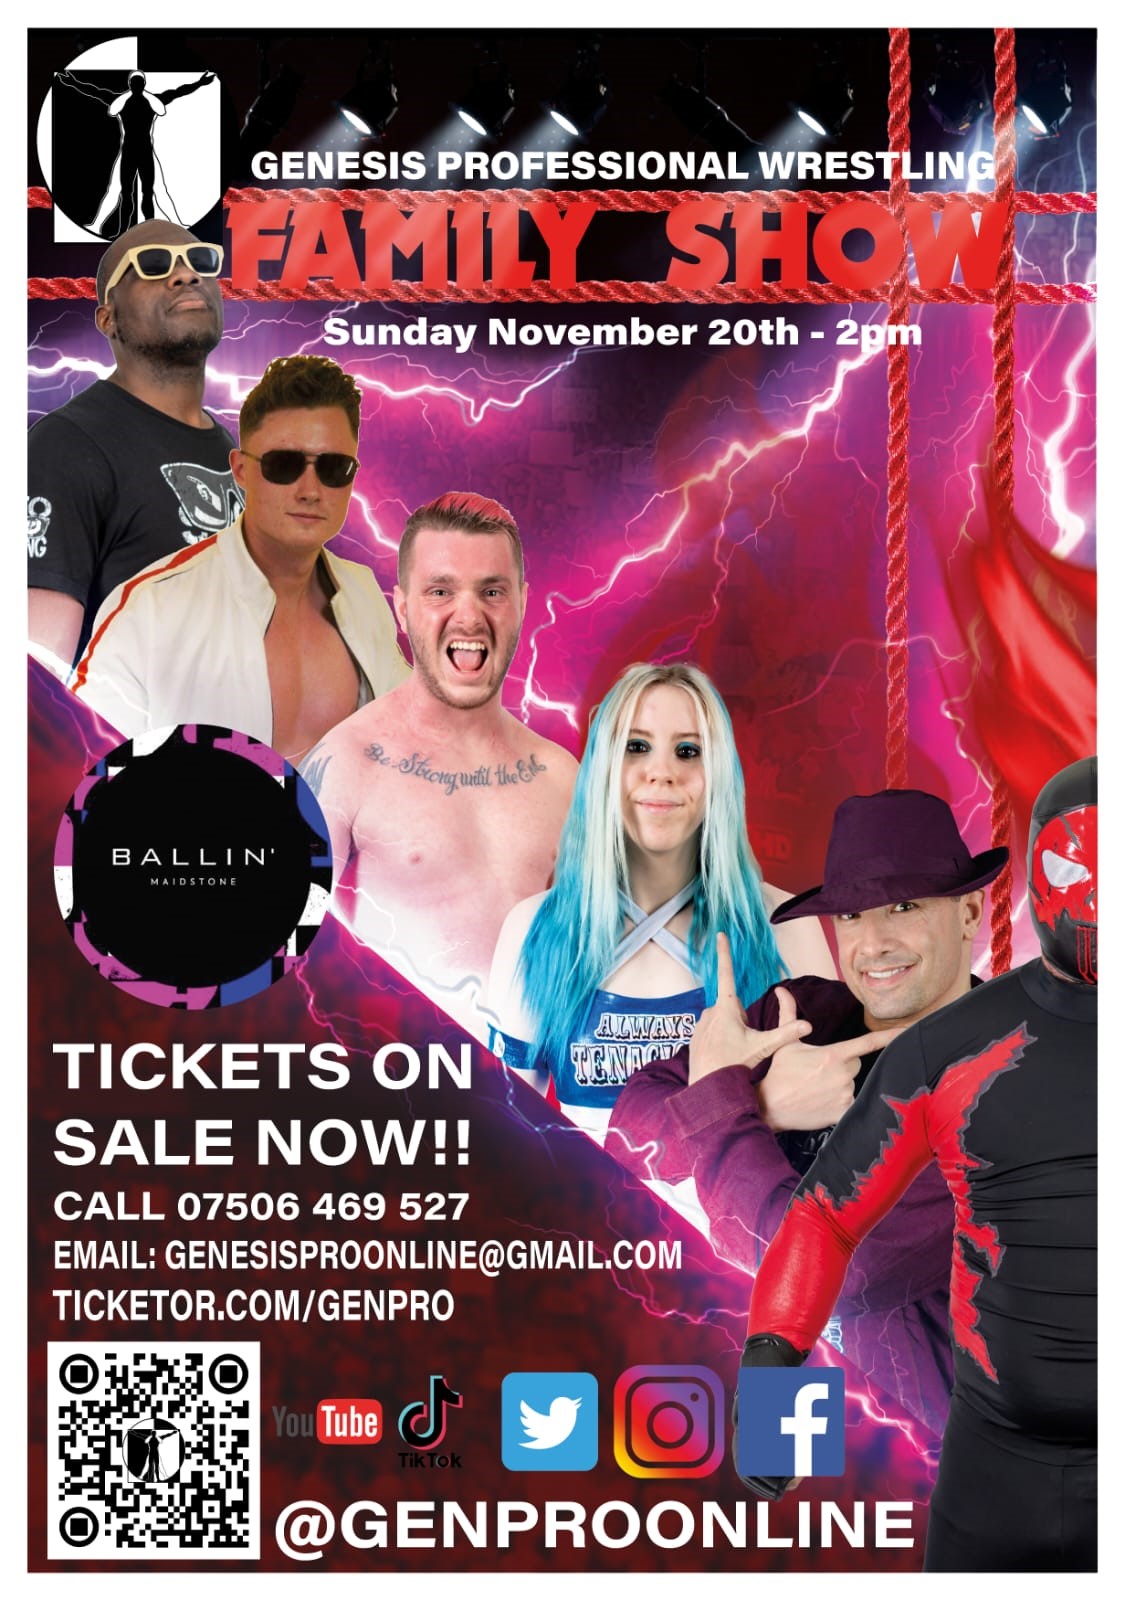 Genesis Professional Wrestling Ballin' Maidstone, family Show 2PM on Nov 20, 14:00@Ballin' - Pick a seat, Buy tickets and Get information on Genesis Professional Wrestling 